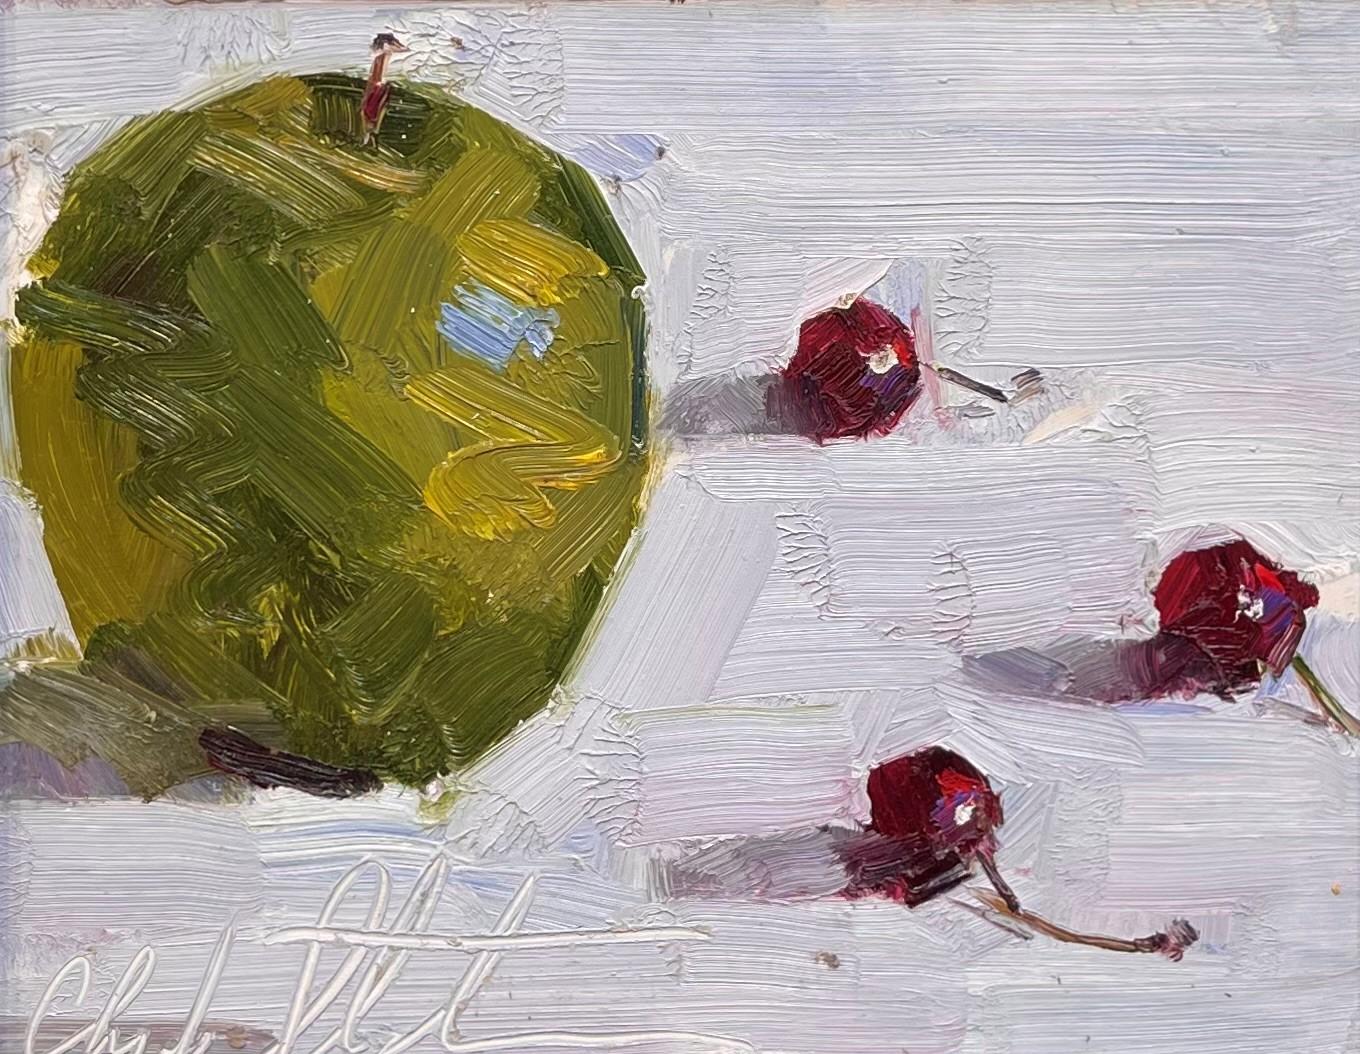 Clyde Steadman Figurative Painting - "Apples and Cherries, " Oil Painting